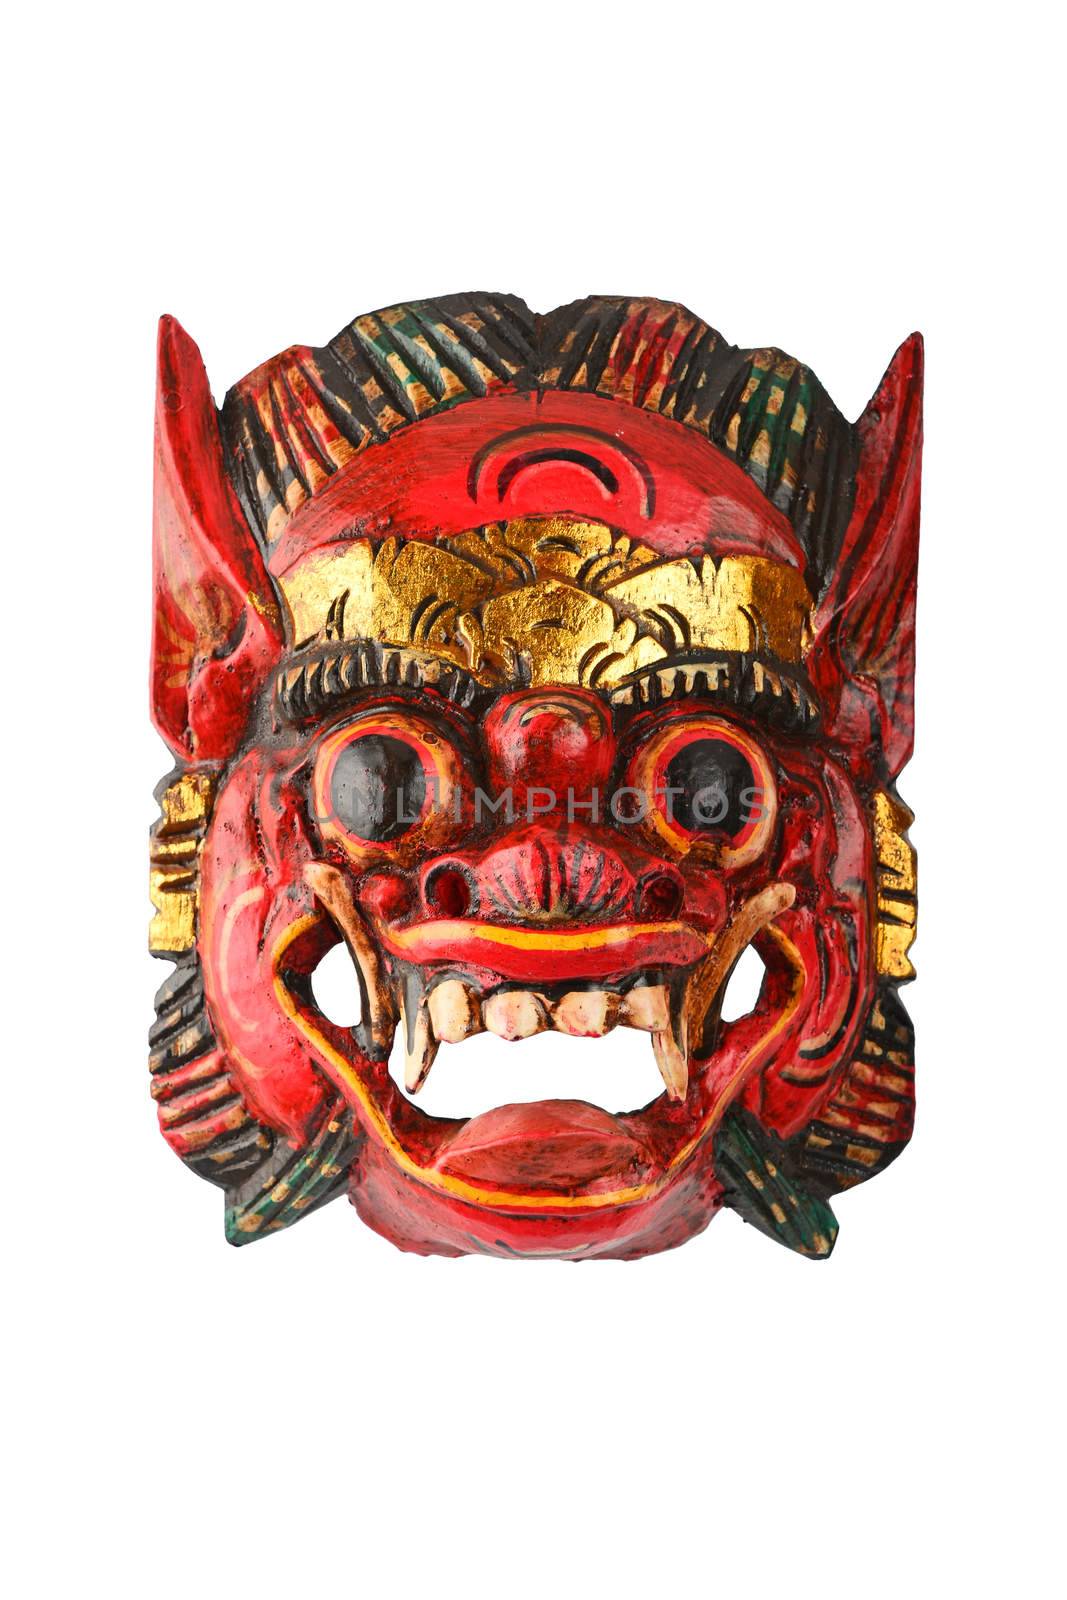 Asian traditional wooden carved painted red mask with face of human or demon isolated on white background, full face